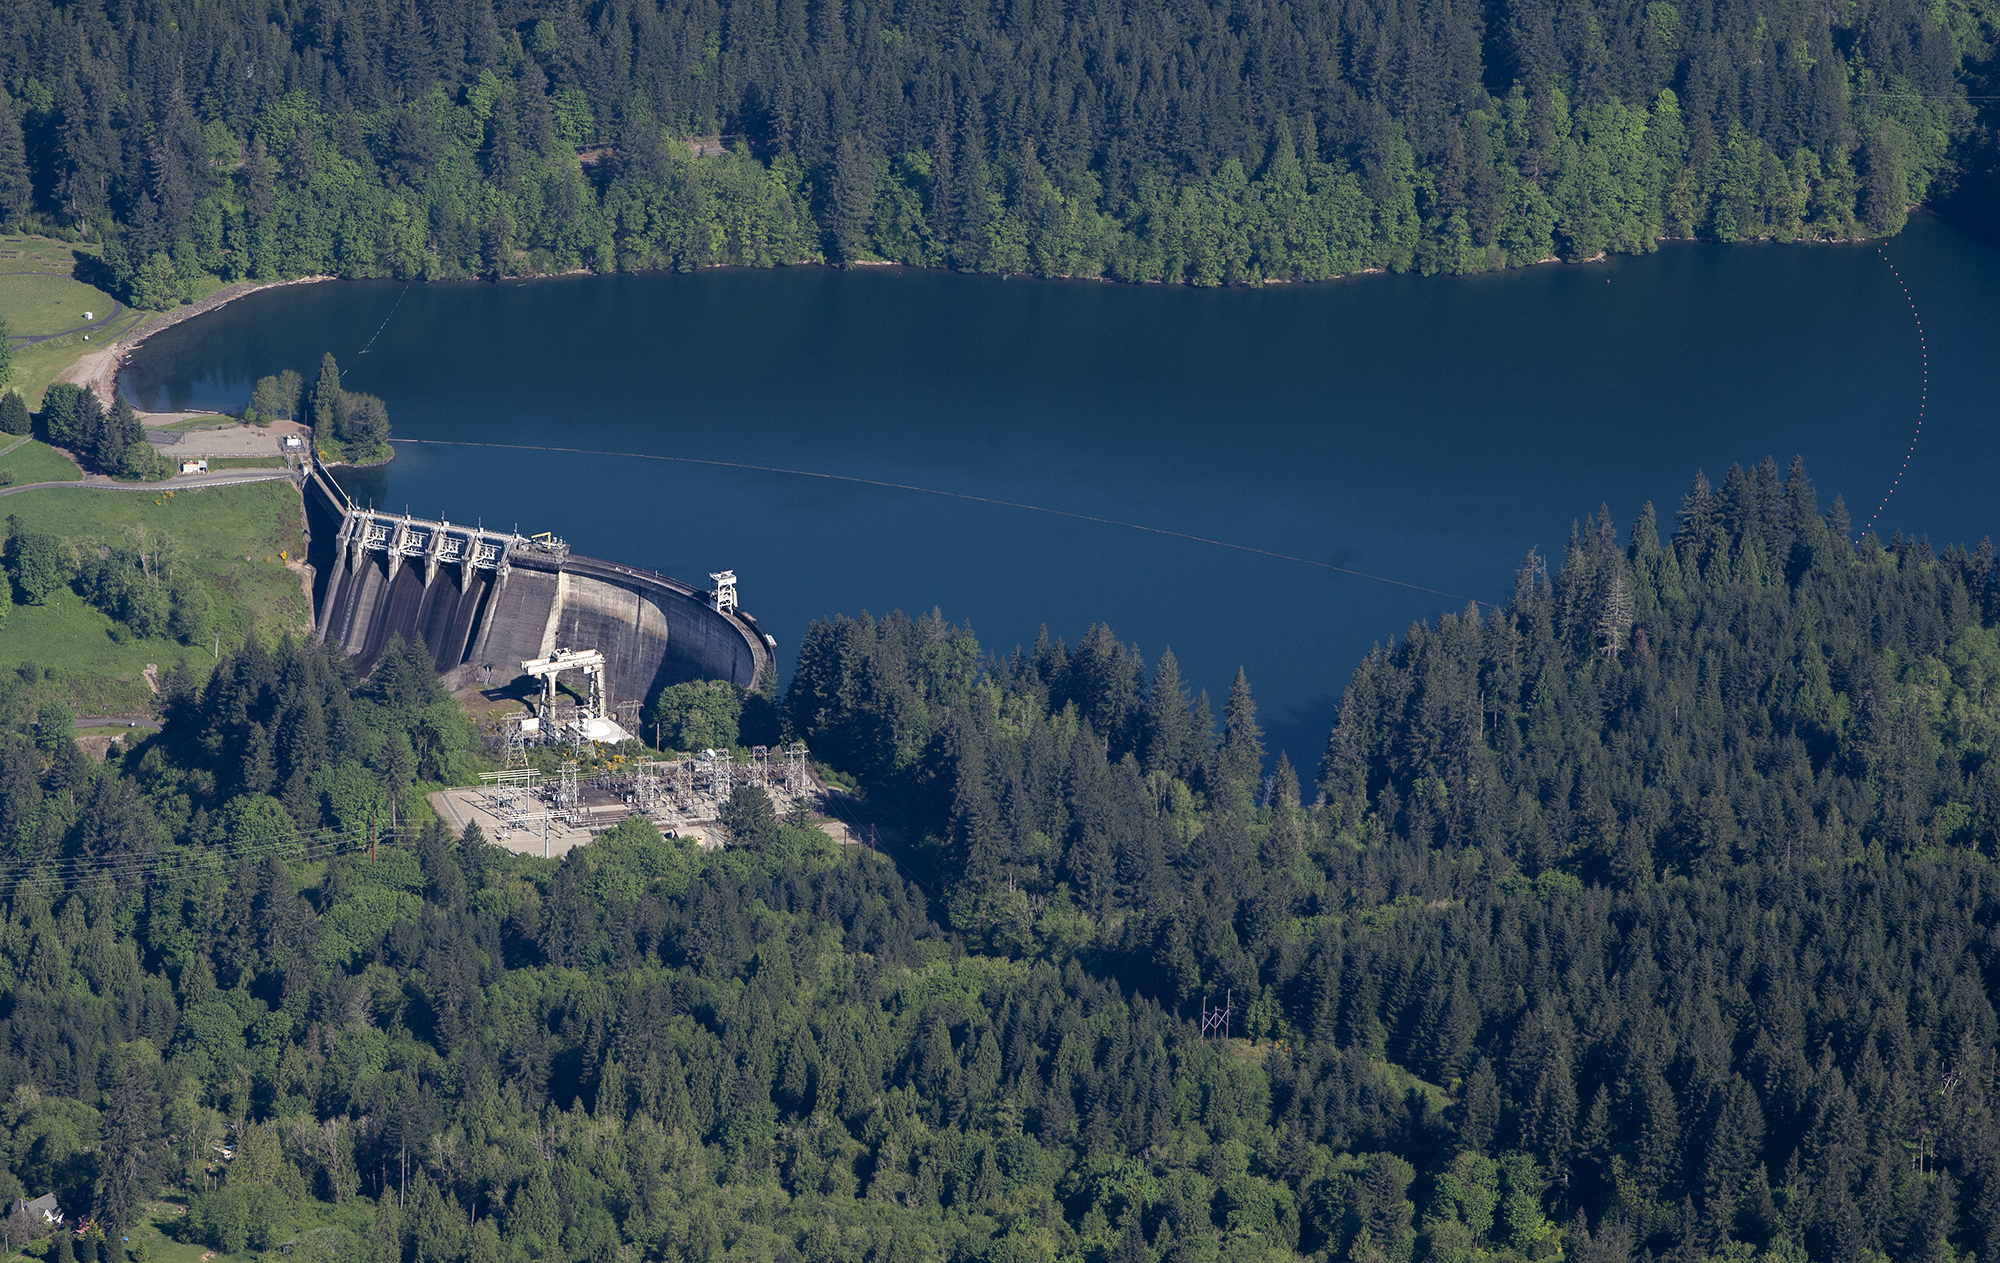 The Merwin Dam pictured from the air on Tuesday, May 11, 2021.